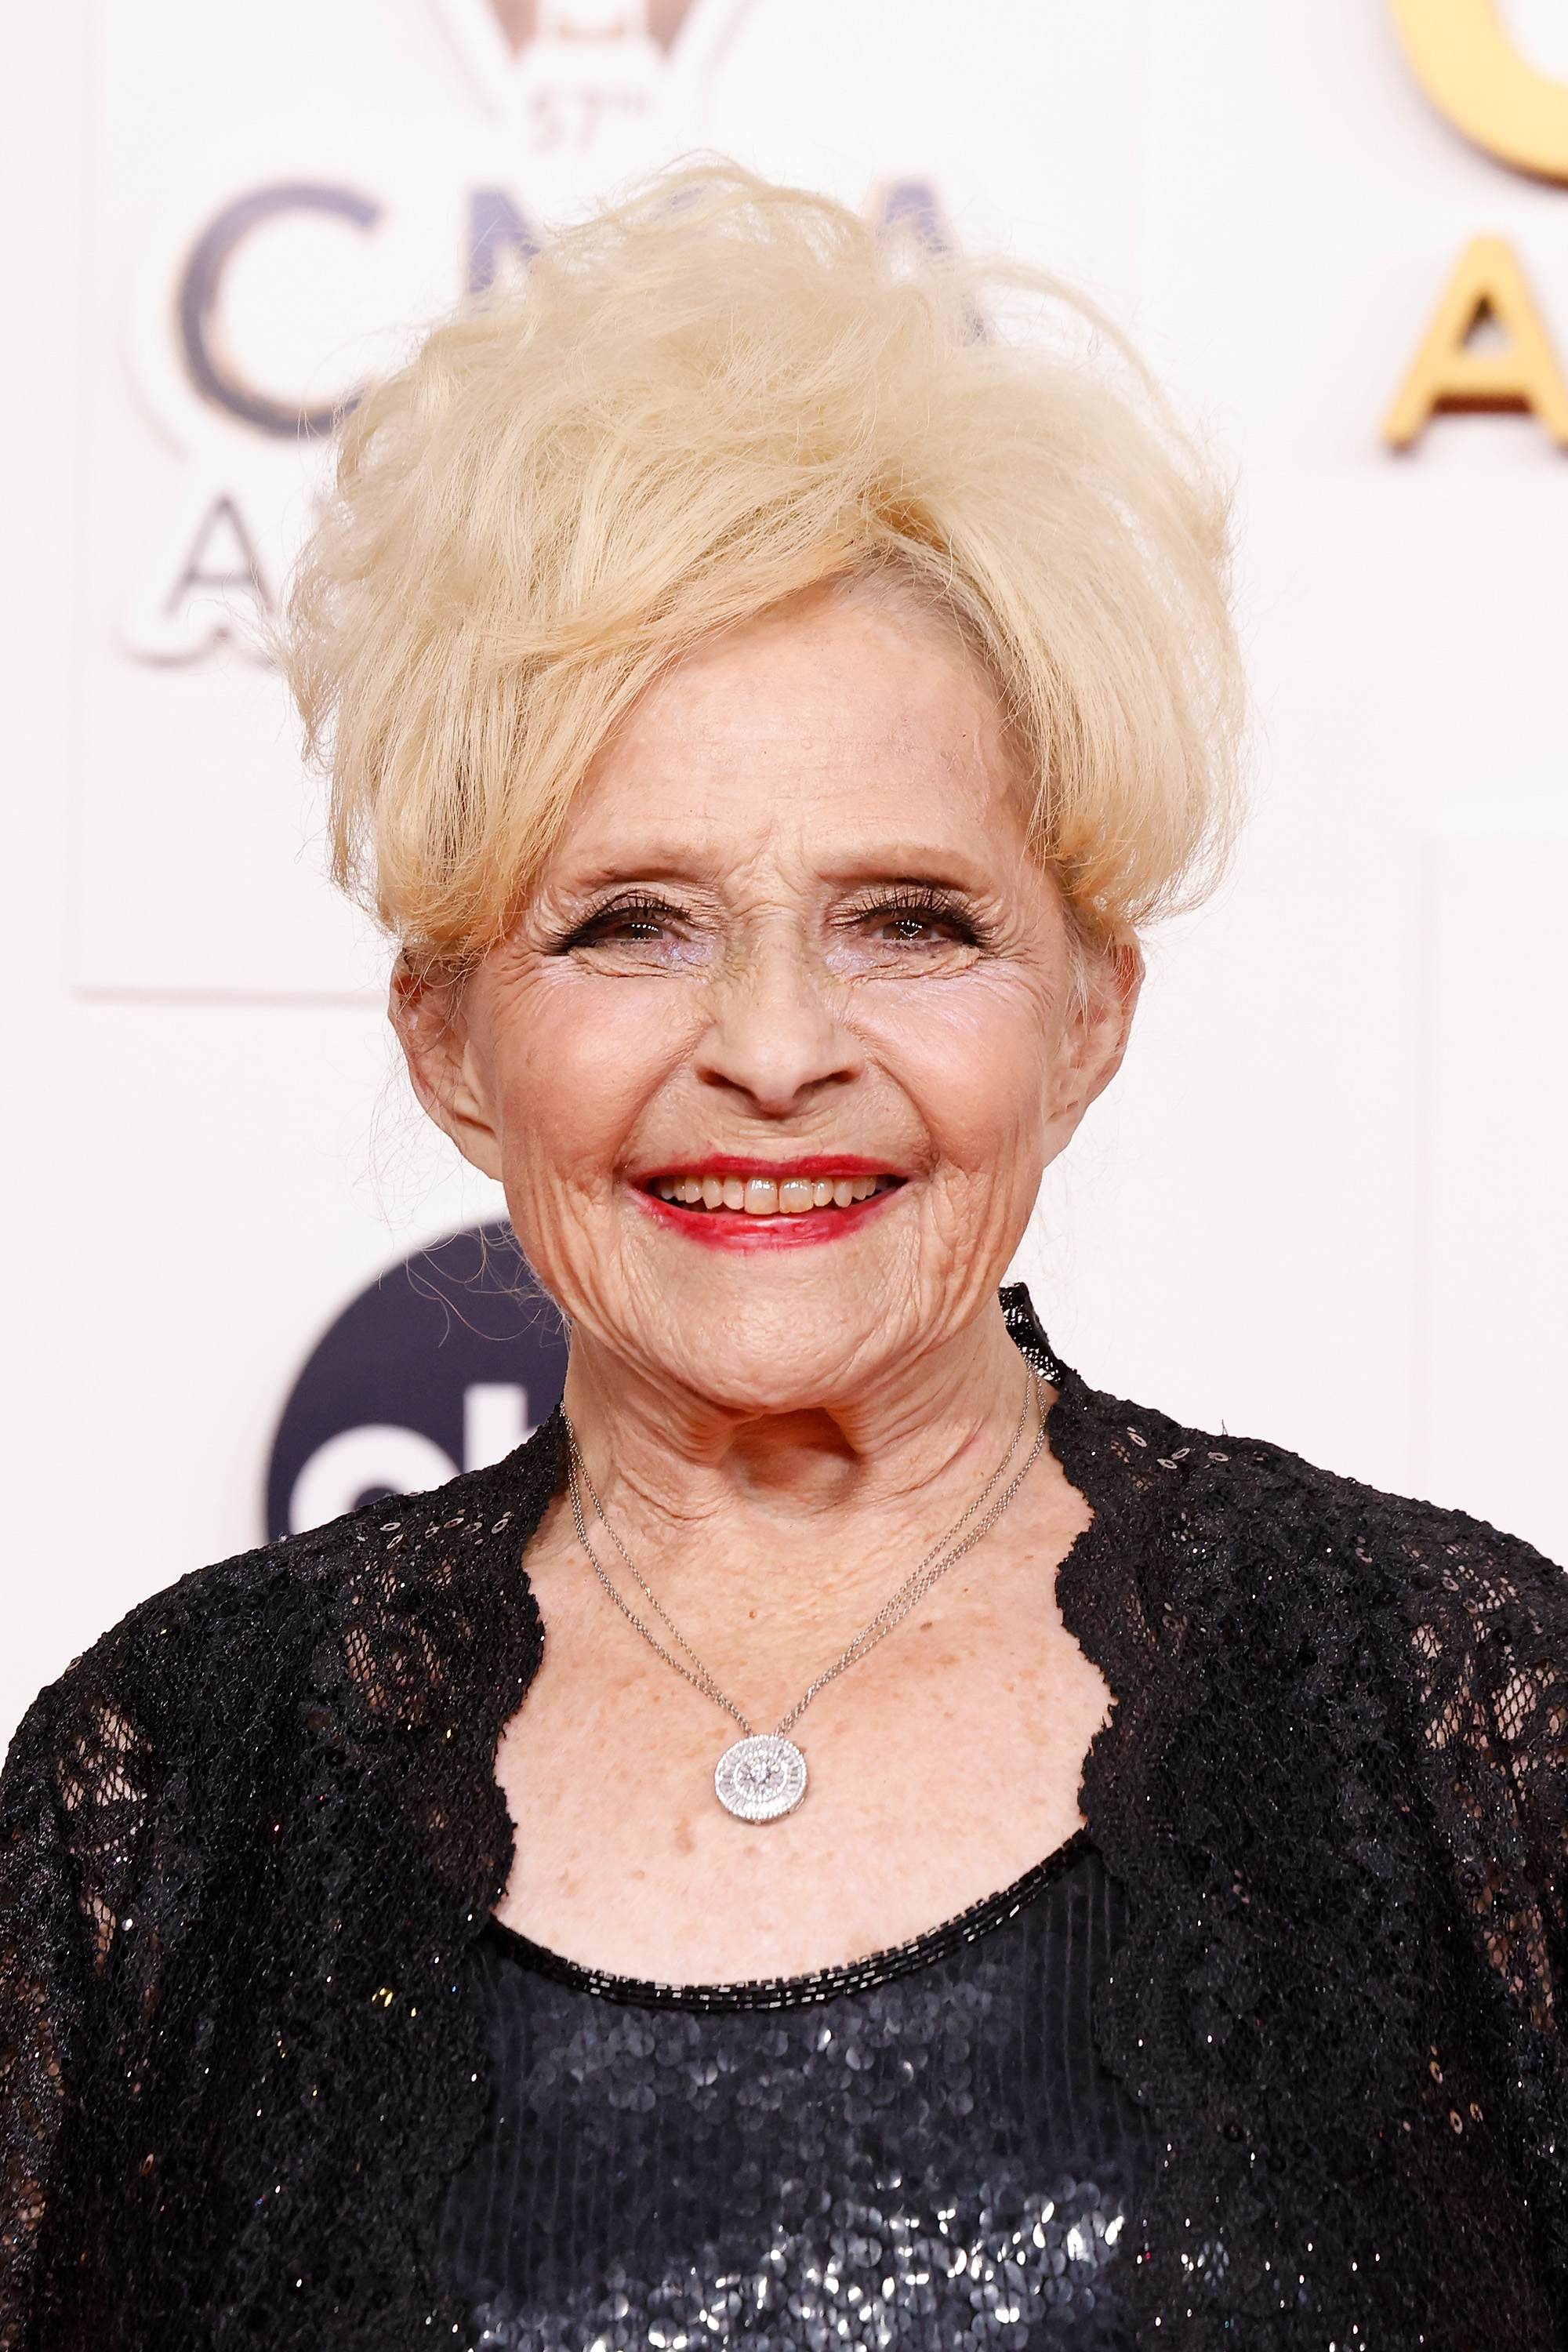 Brenda Lee at the CMA Awards in Nashville in 2023 | Source: Getty Images